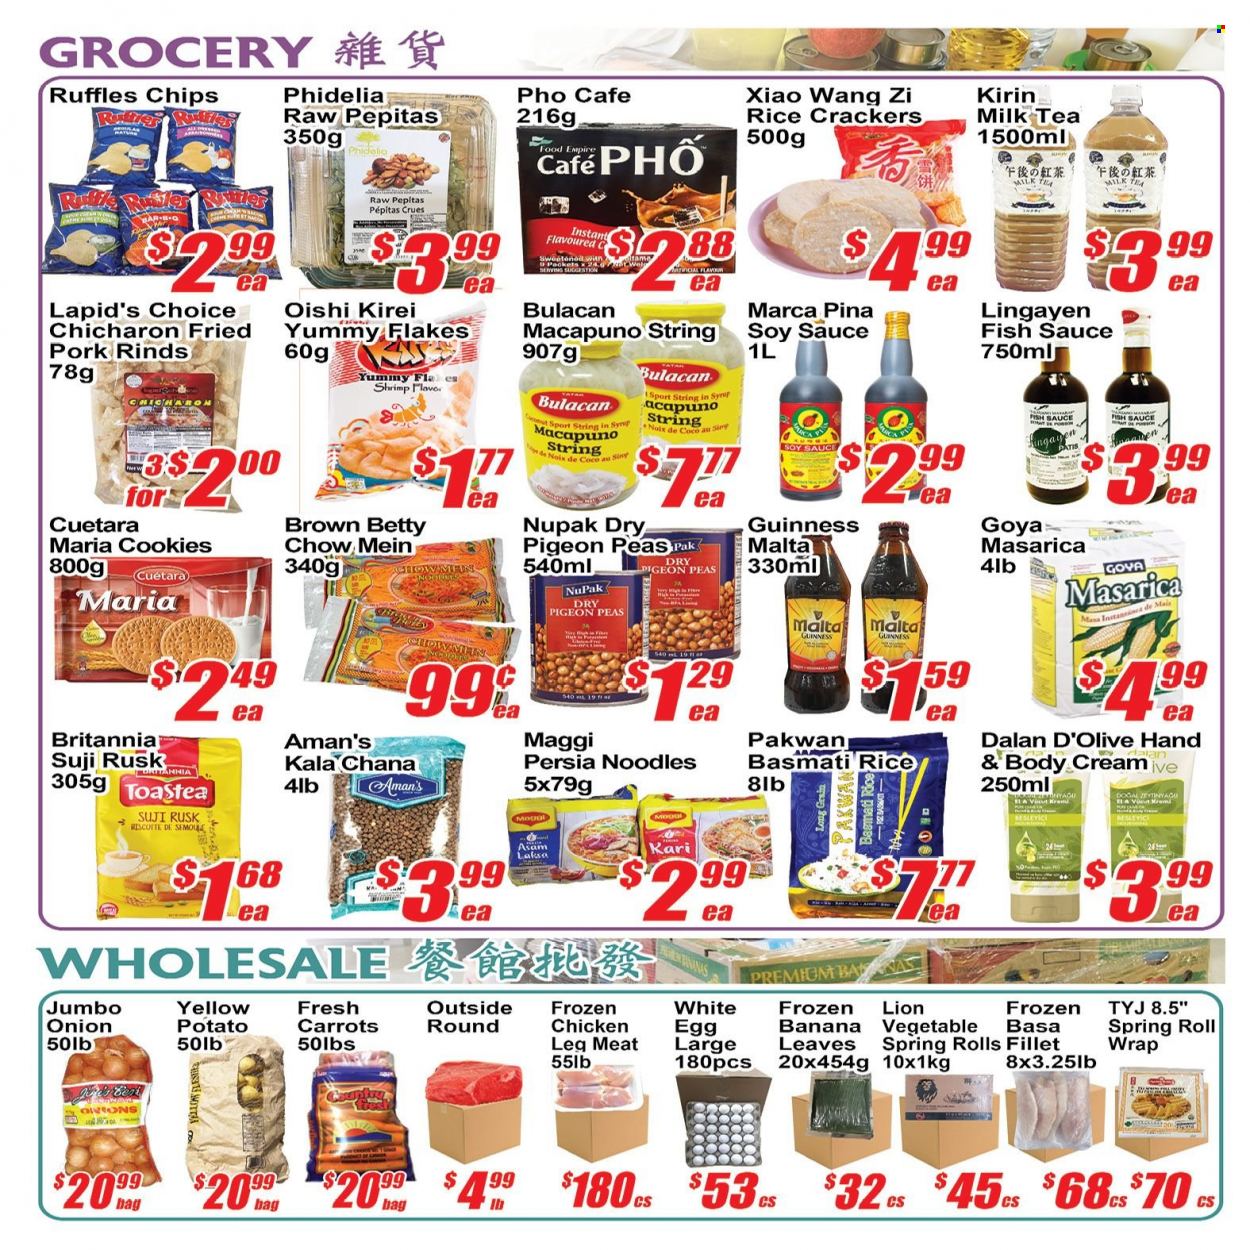 Jian Hing Supermarket Flyer - November 25, 2022 - December 01, 2022 - Sales products - pie, rusks, carrots, peas, onion, fish, shrimps, sauce, spring rolls, noodles, milk, eggs, cookies, crackers, rice crackers, Ruffles, Maggi, Goya, basmati rice, toor dal, fish sauce, soy sauce, tea, Guinness, chicken legs. Page 2.